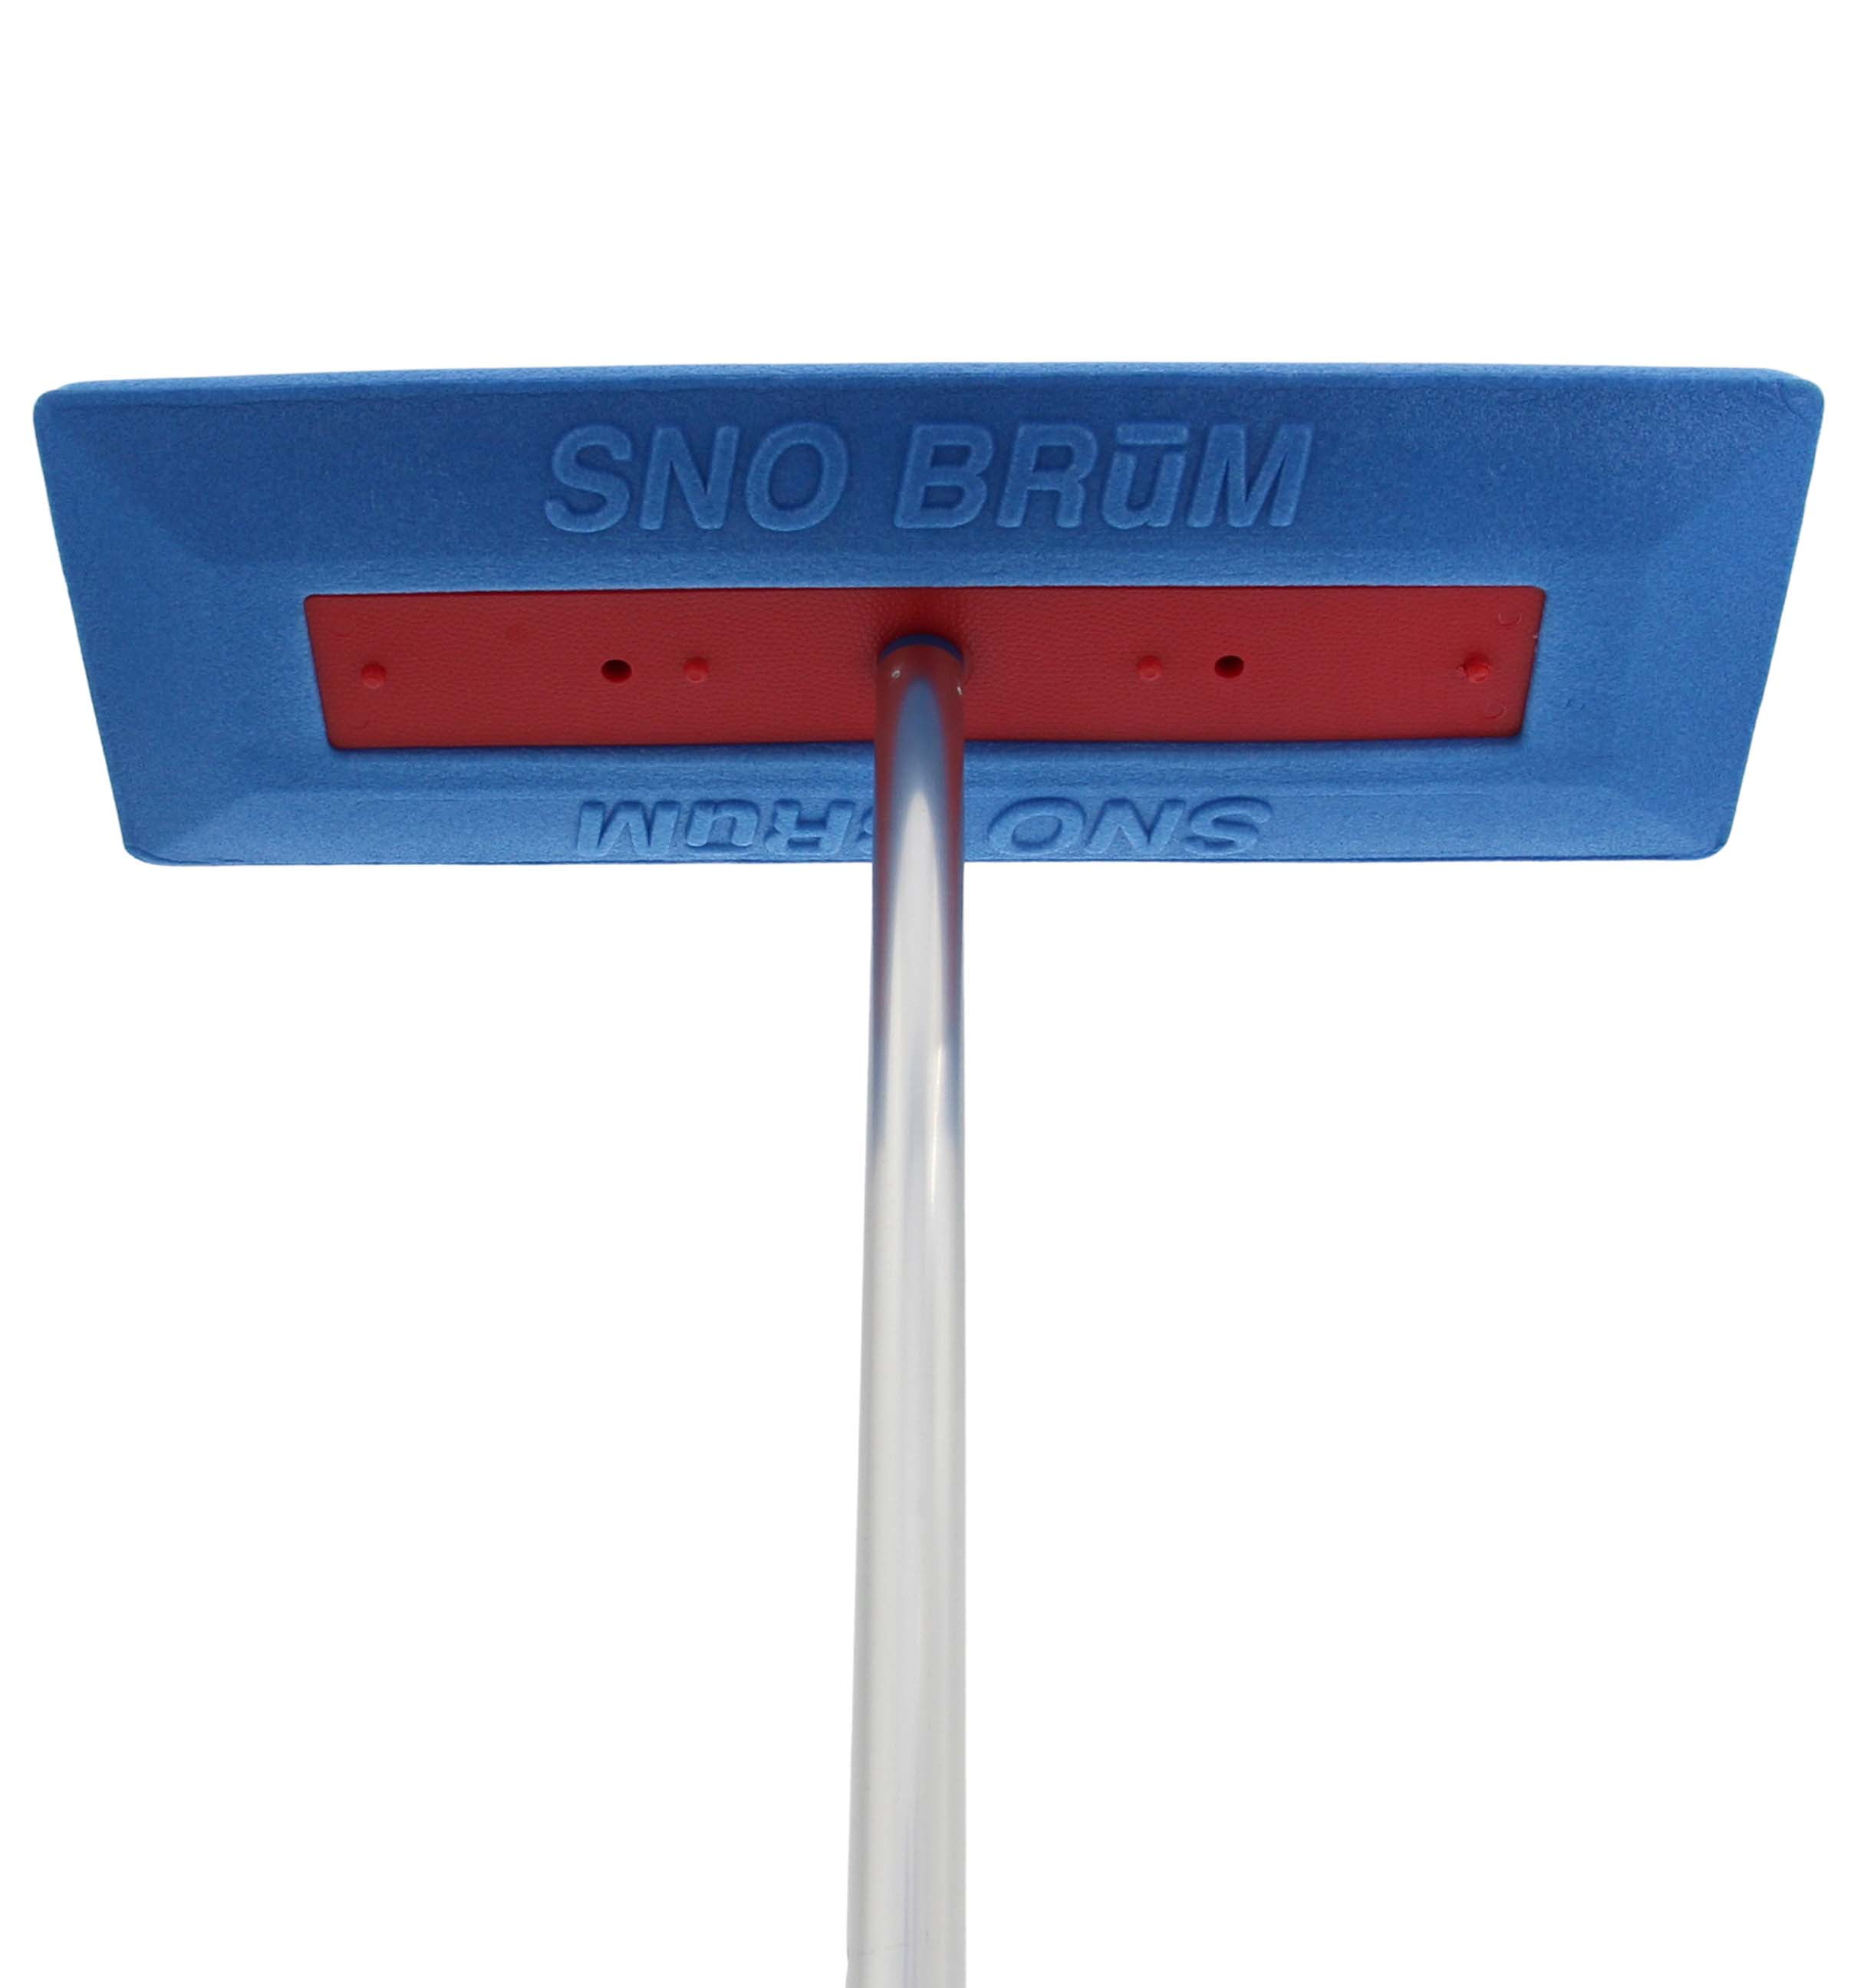 Quickly Remove Heavy 48” Handle Professional Grade Snow Remover Tool / Brush for Vehicles SnoPro by SnoBrum Wet Snow from Multiple Cars Scratchfree Push-Broom Design 